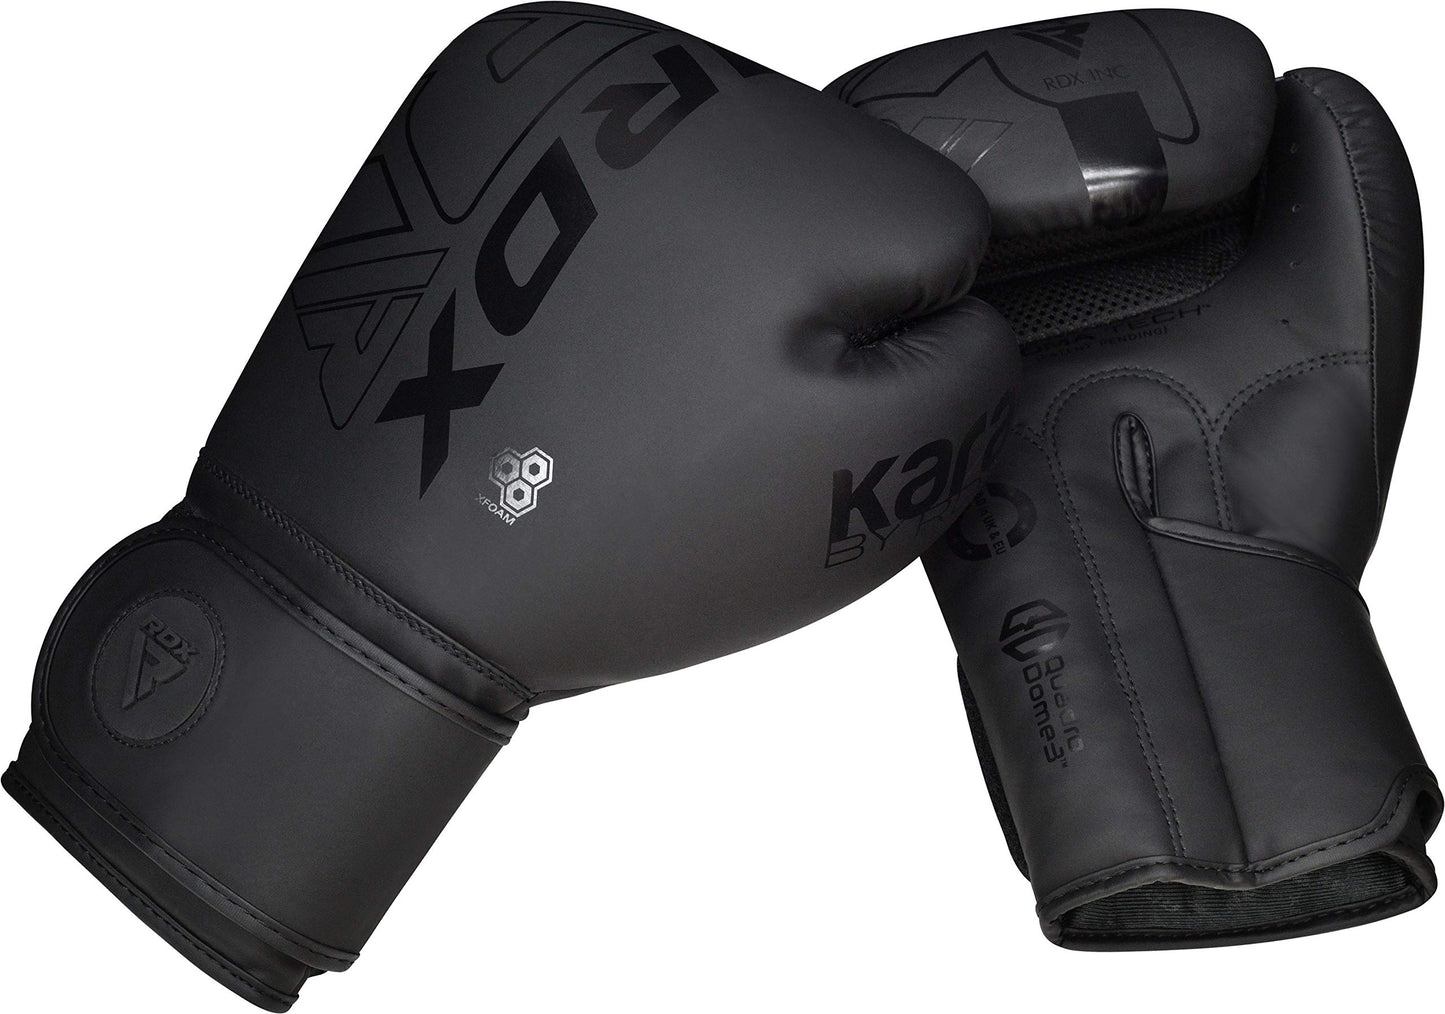 RDX Boxing Gloves, Pro Training Sparring, Maya Hide Leather, Muay Thai MMA Kickboxing, Men Women Adult, Heavy Punching Bag Mitts Focus Pads Workout, Ventilated Palm, Multi Layered, 8 10 12 14 16 Oz